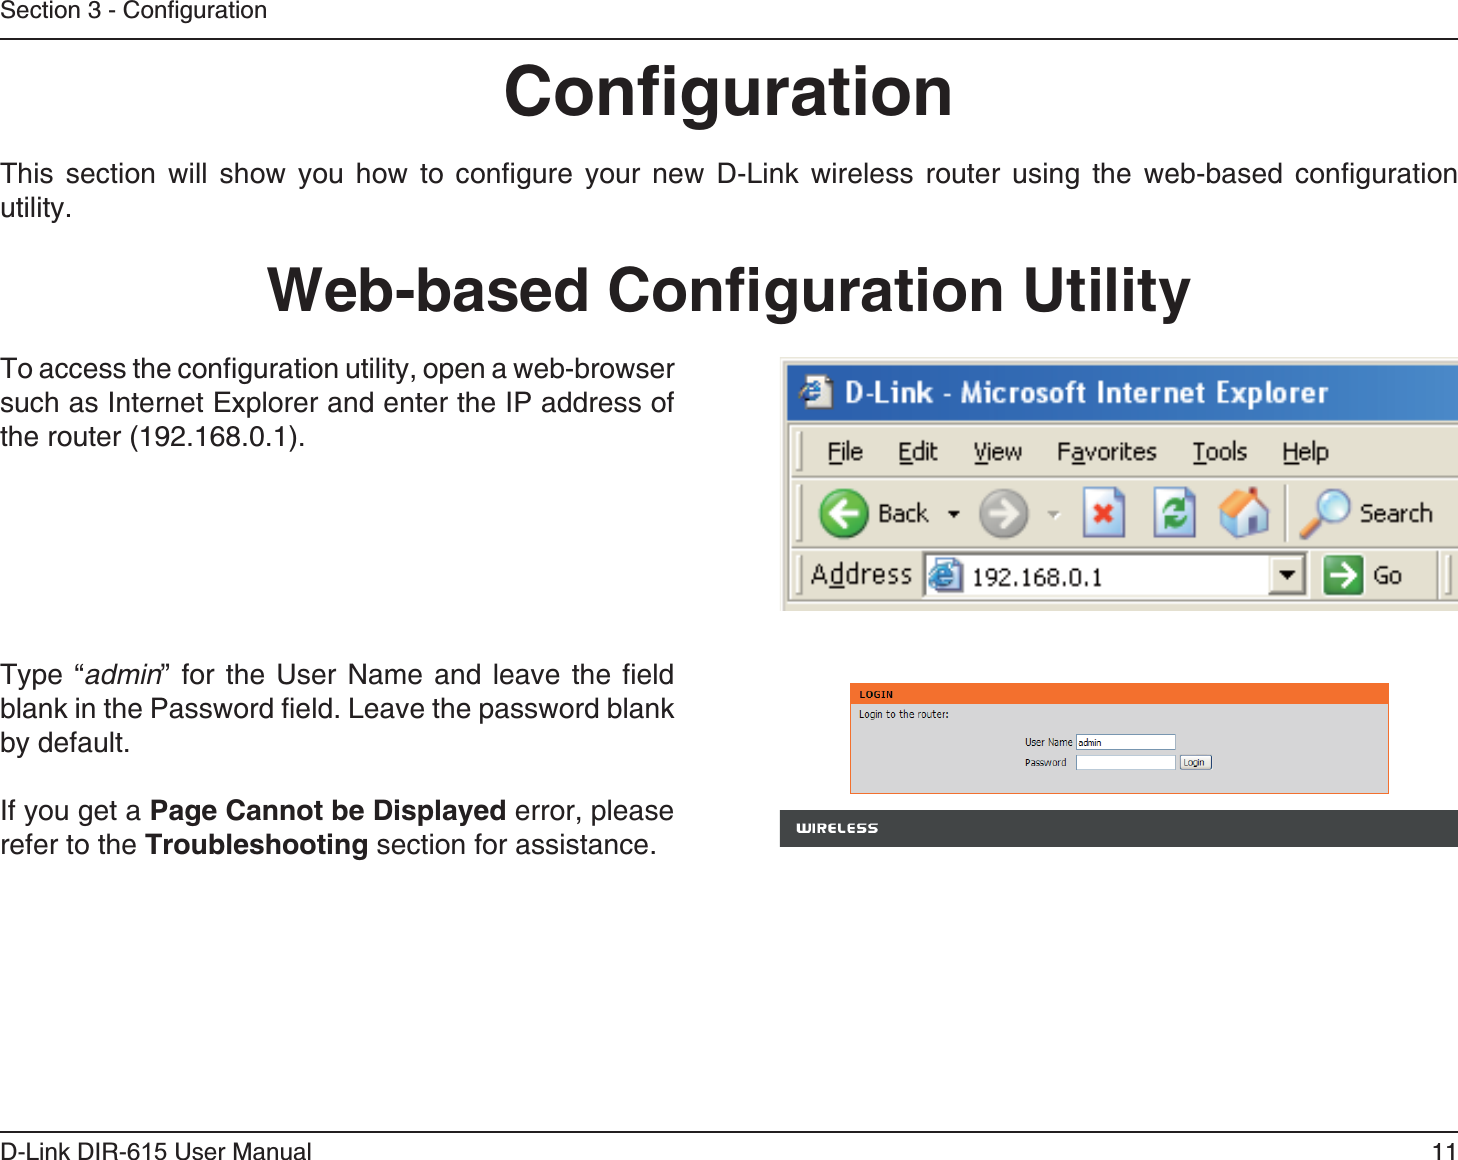 11D-Link DIR-6 User ManualSection 3 - ConfigurationThis section will show you how to configure your new D-Link wireless router using the web-based configuration utility.To access the configuration utility, open a web-browser such as Internet Explorer and enter the IP address of the router (192.168.0.1).Type “admin” for the User Name and leave the field blank in the Password field. Leave the password blank by default.If you get a  error, please refer to the  section for assistance.